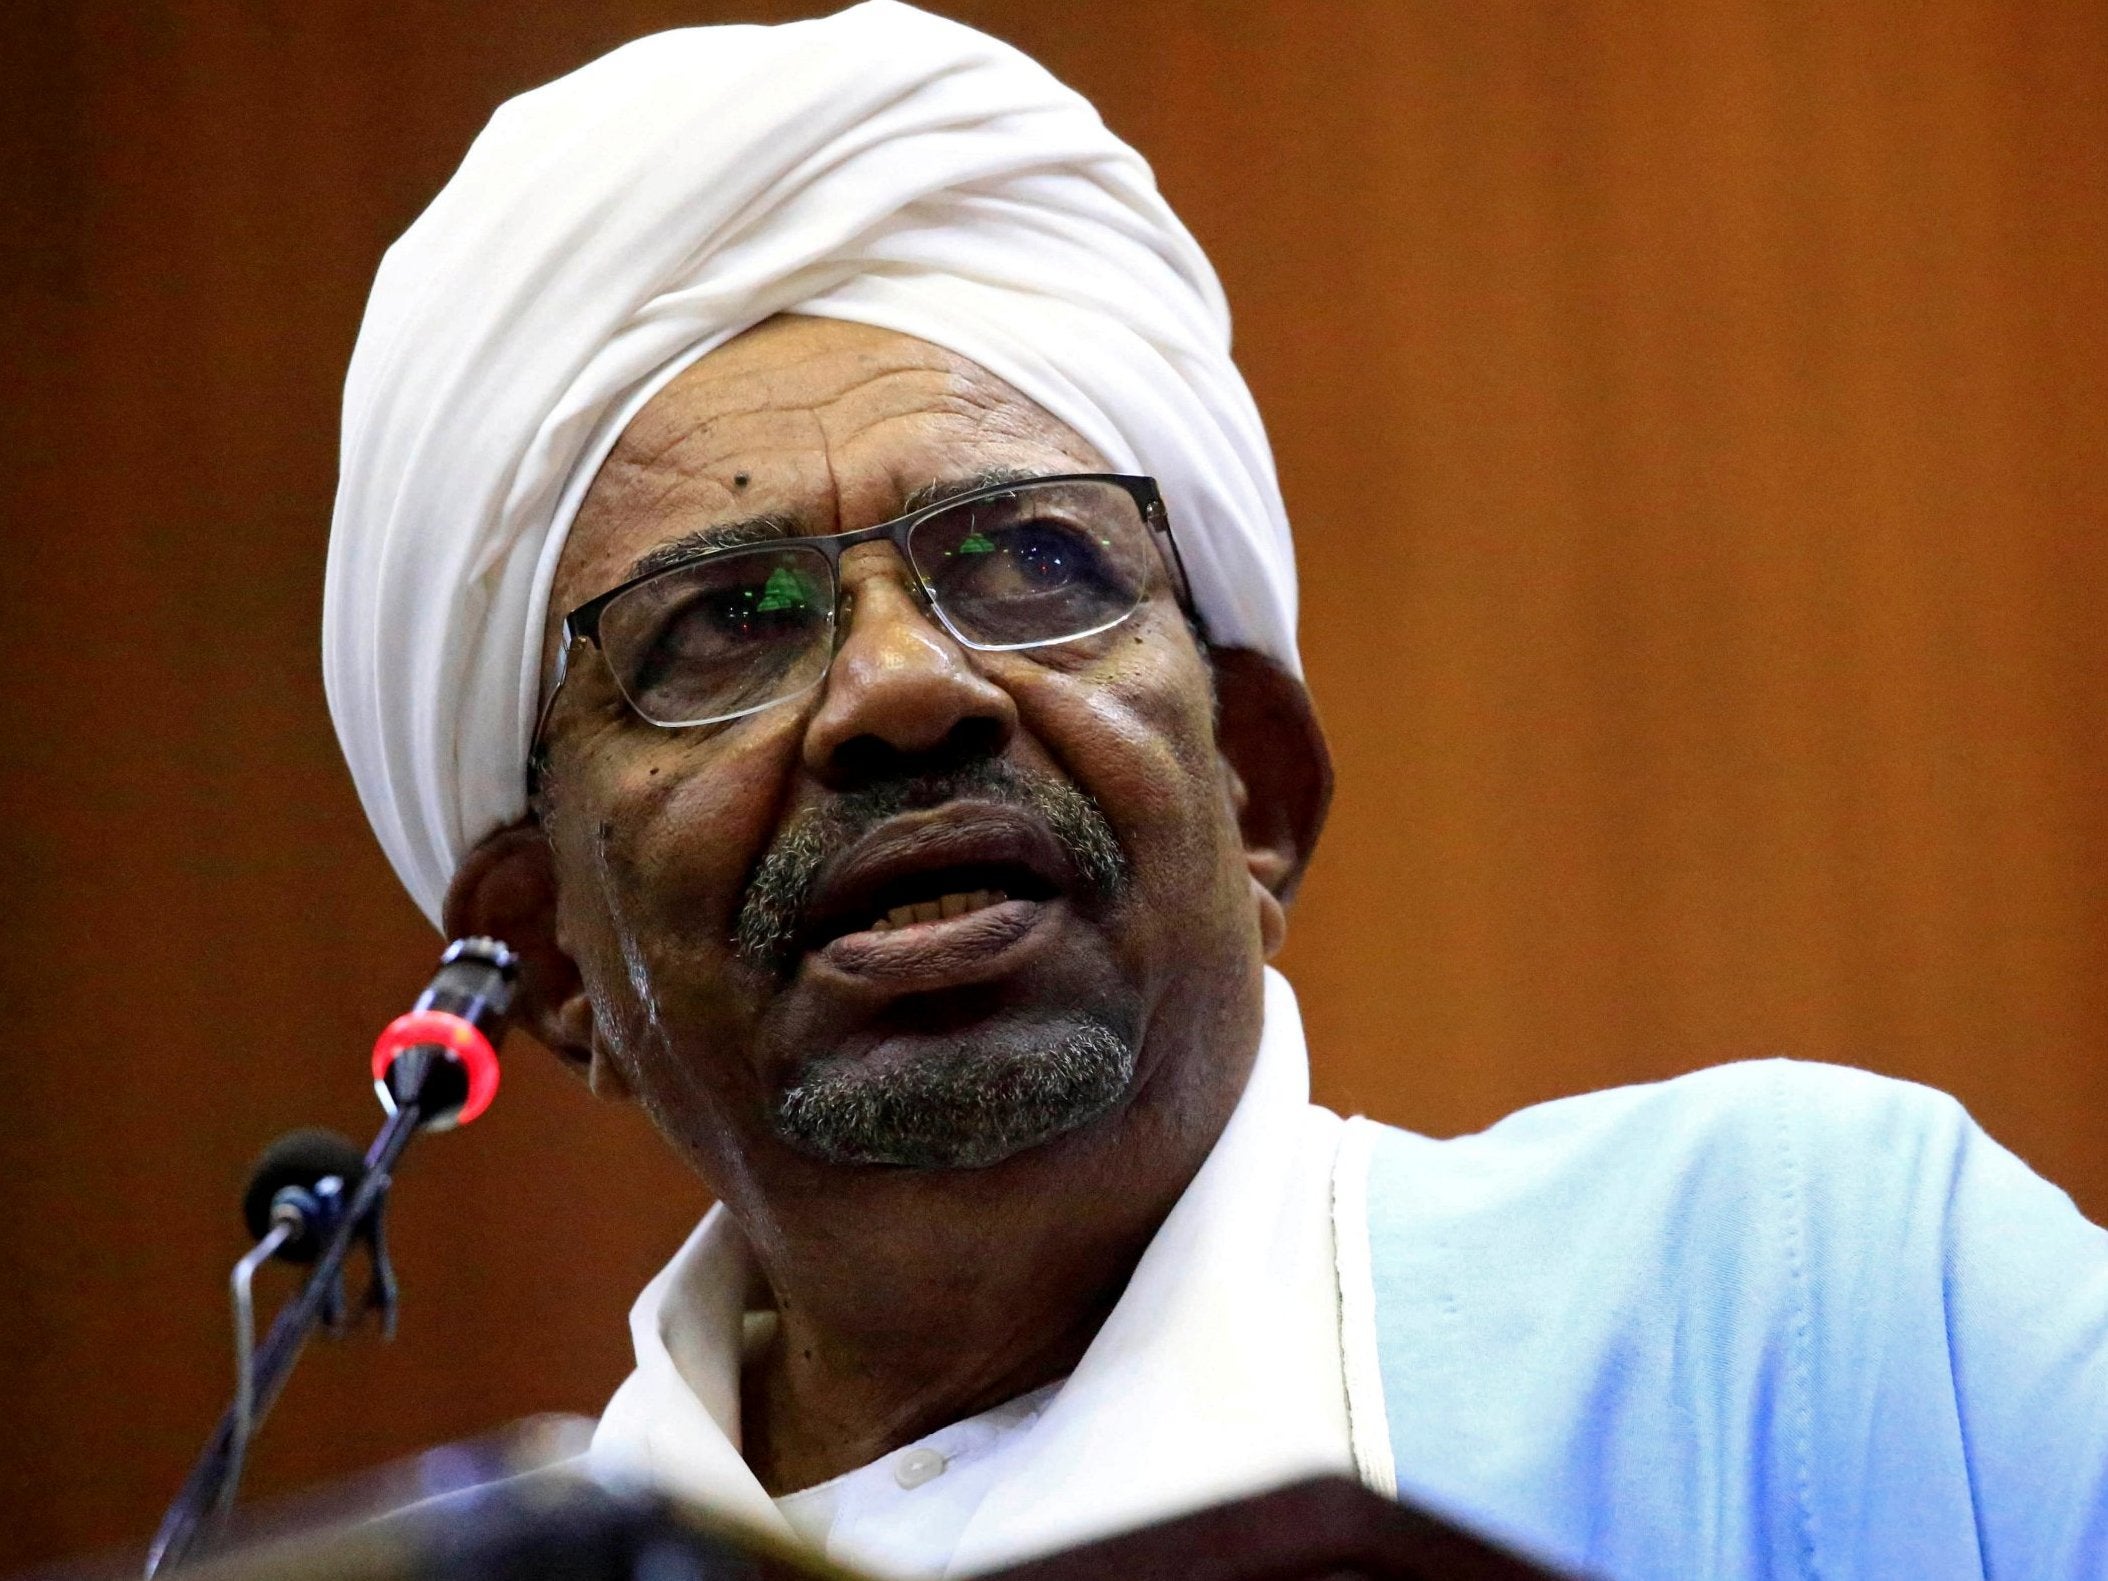 Omar al-Bashir will not be deported to the International Criminal Court, Sudanese military says.